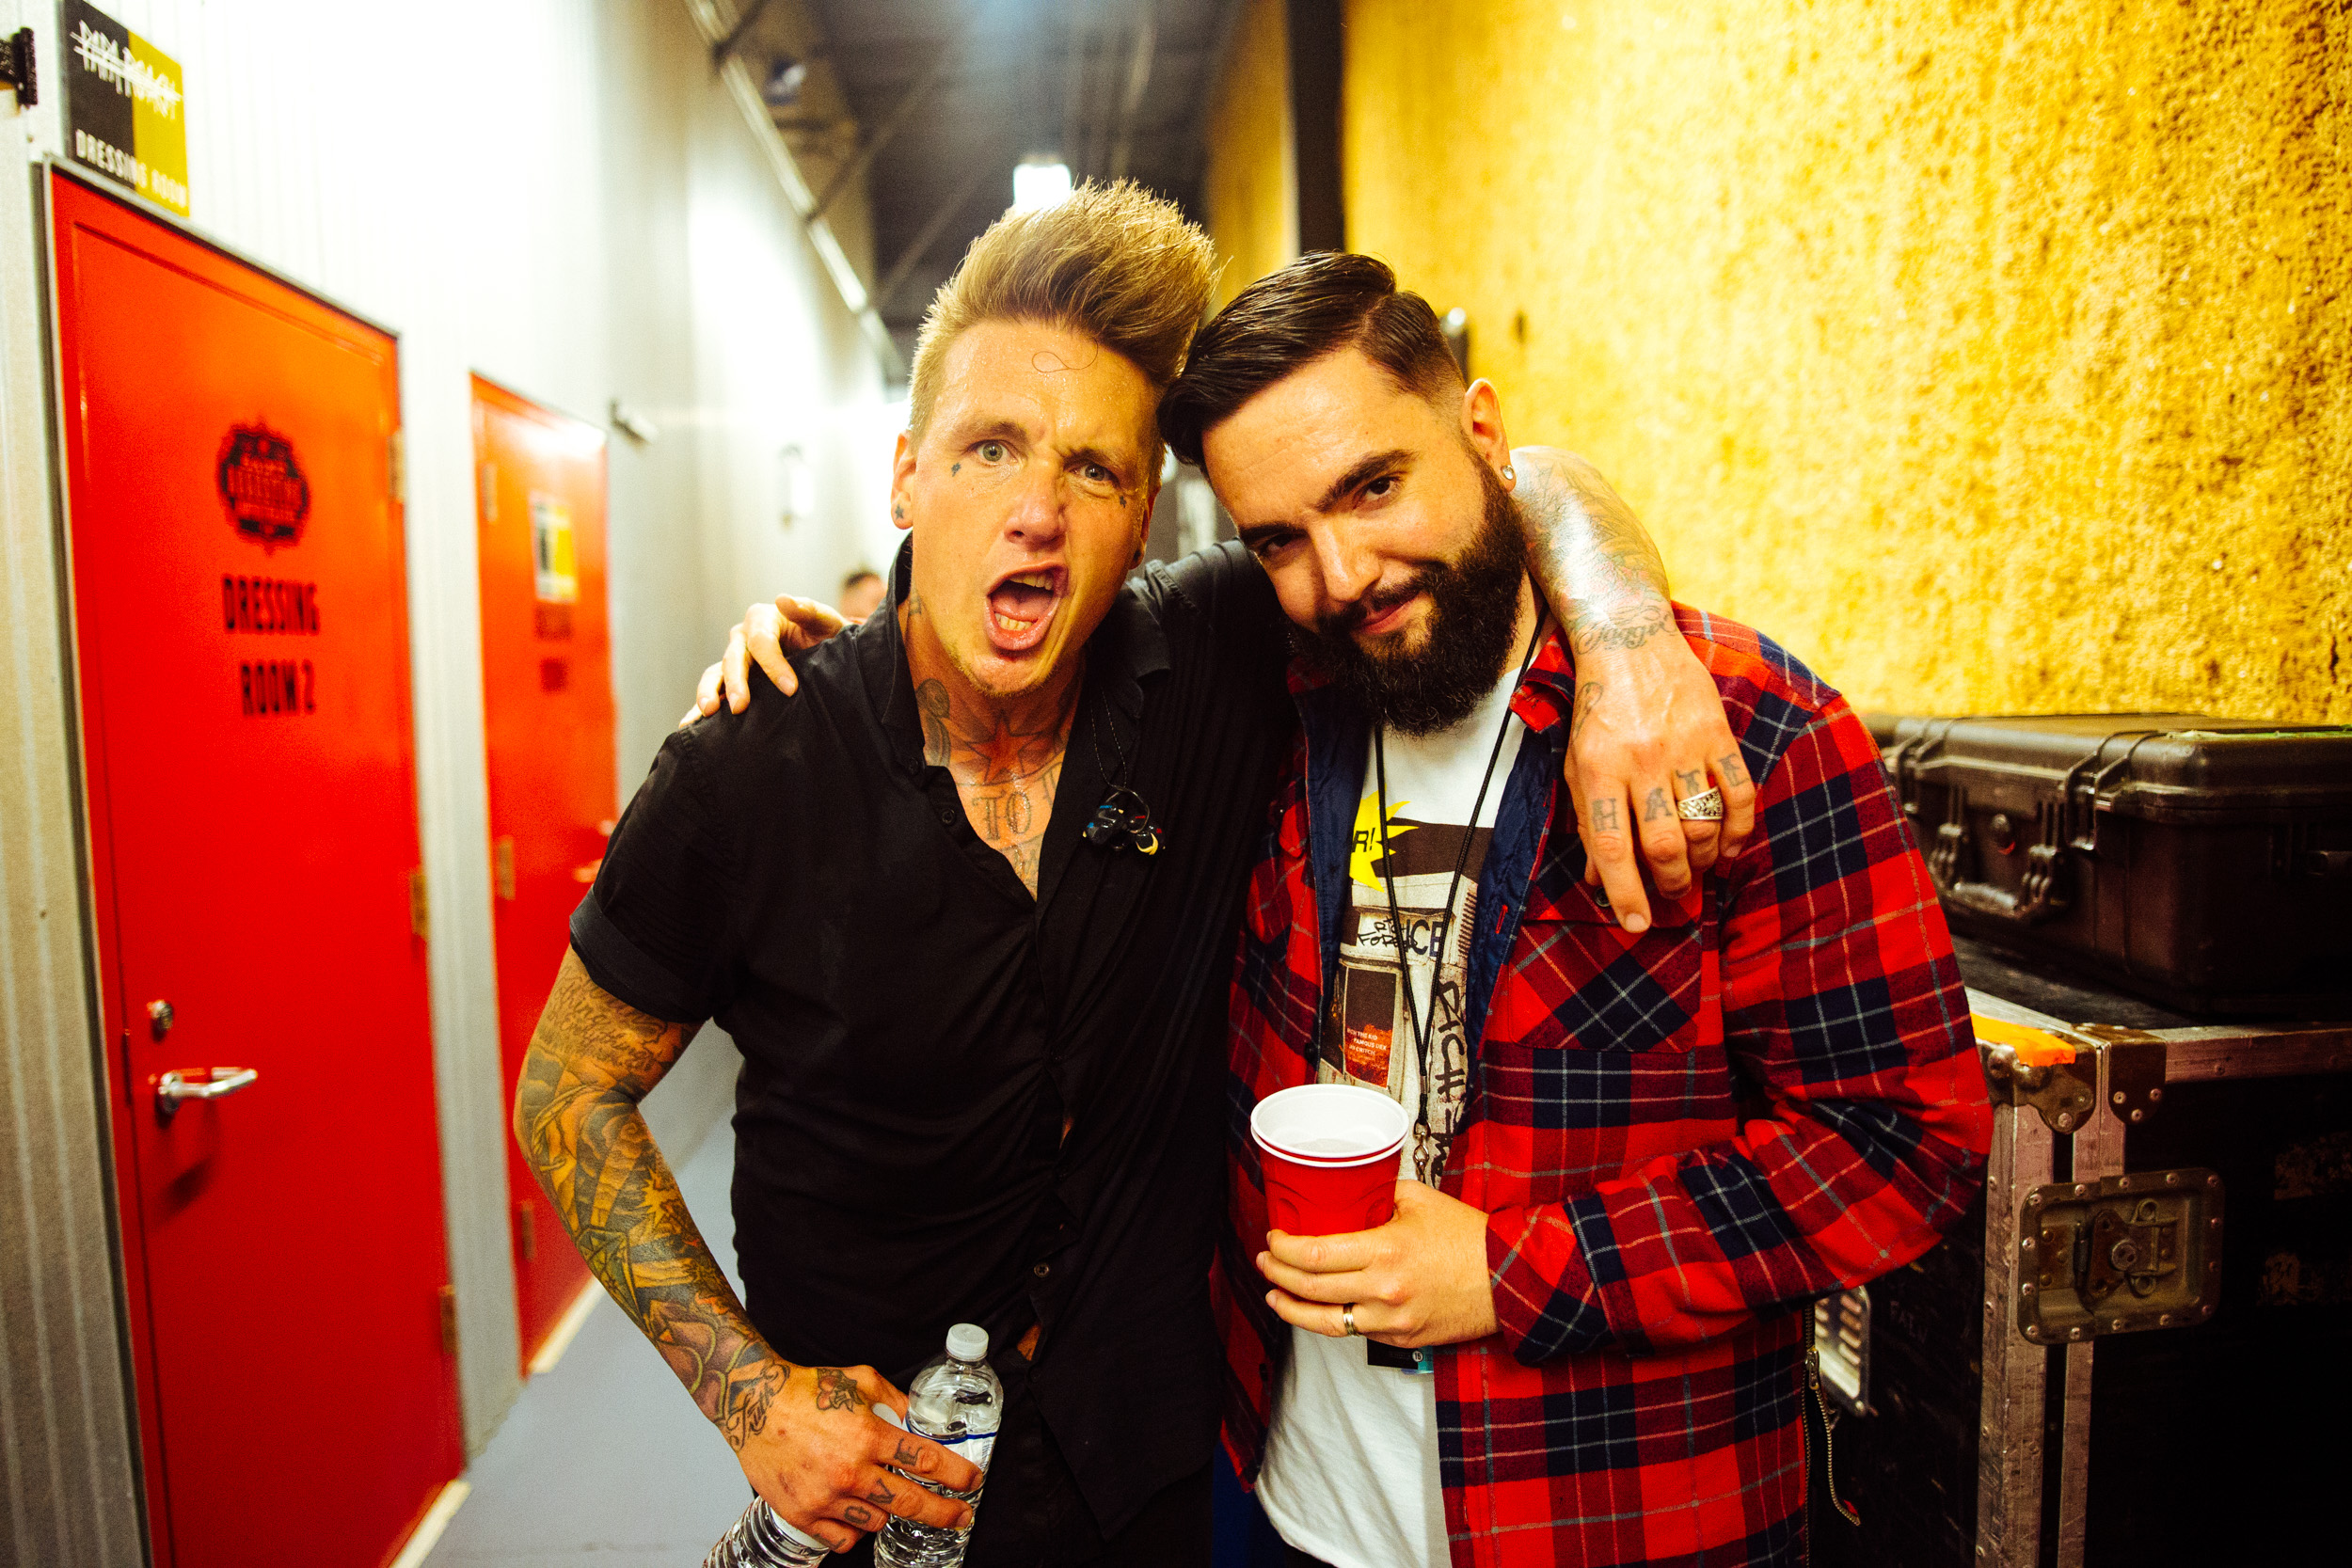 Jacoby of Papa Roach and Jeremy of A Day To Remember